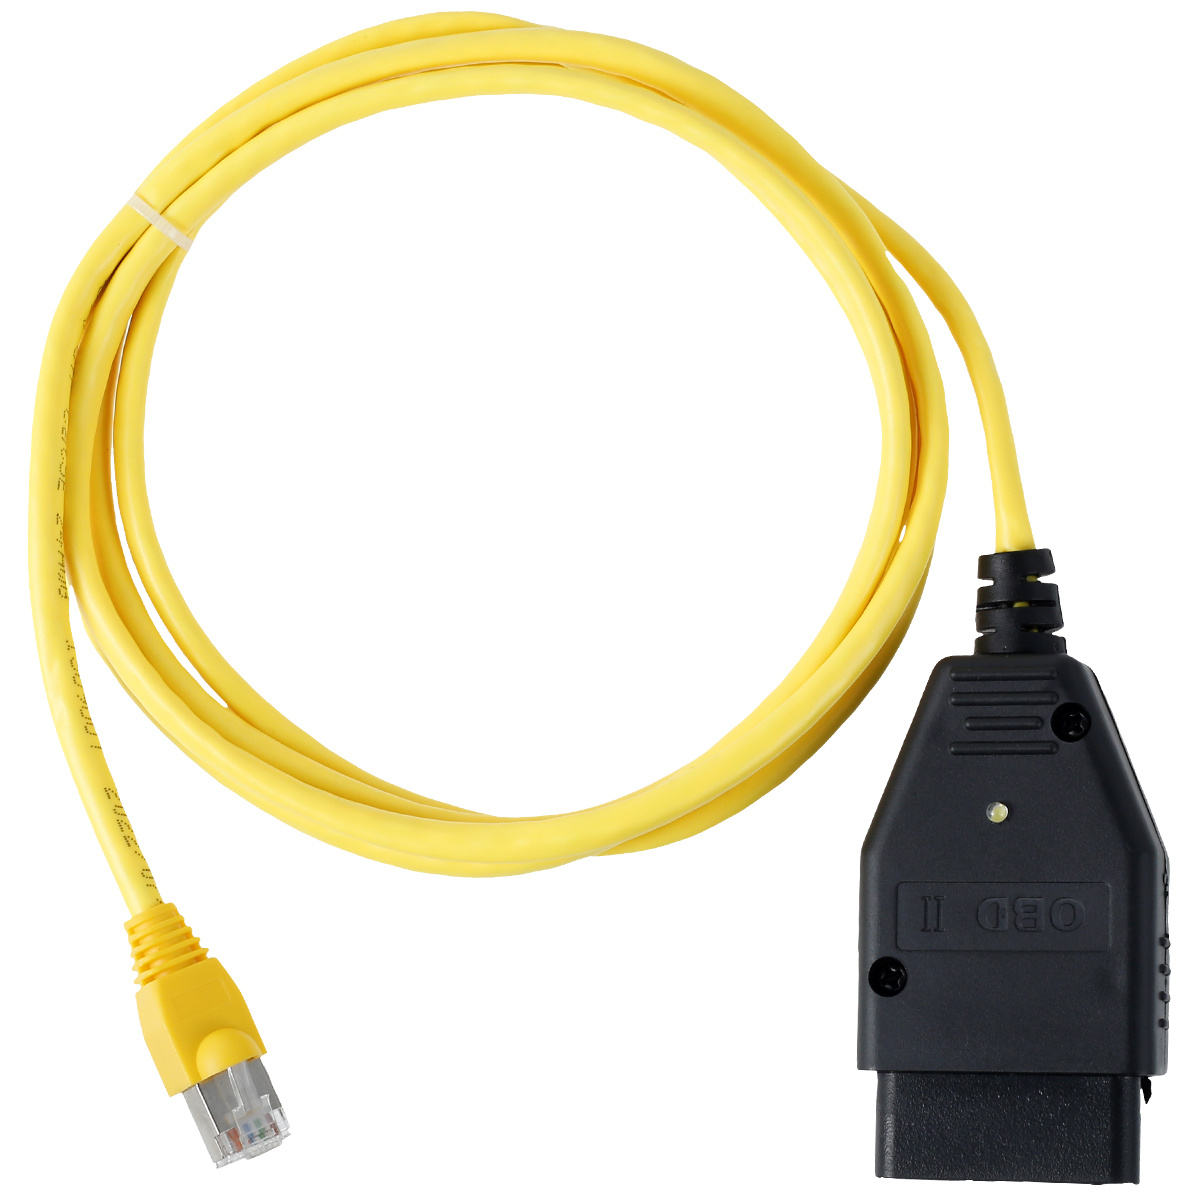 ESYS ENET Cable For BMW F-series ICOM OBD2 Coding Diagnostic Cable